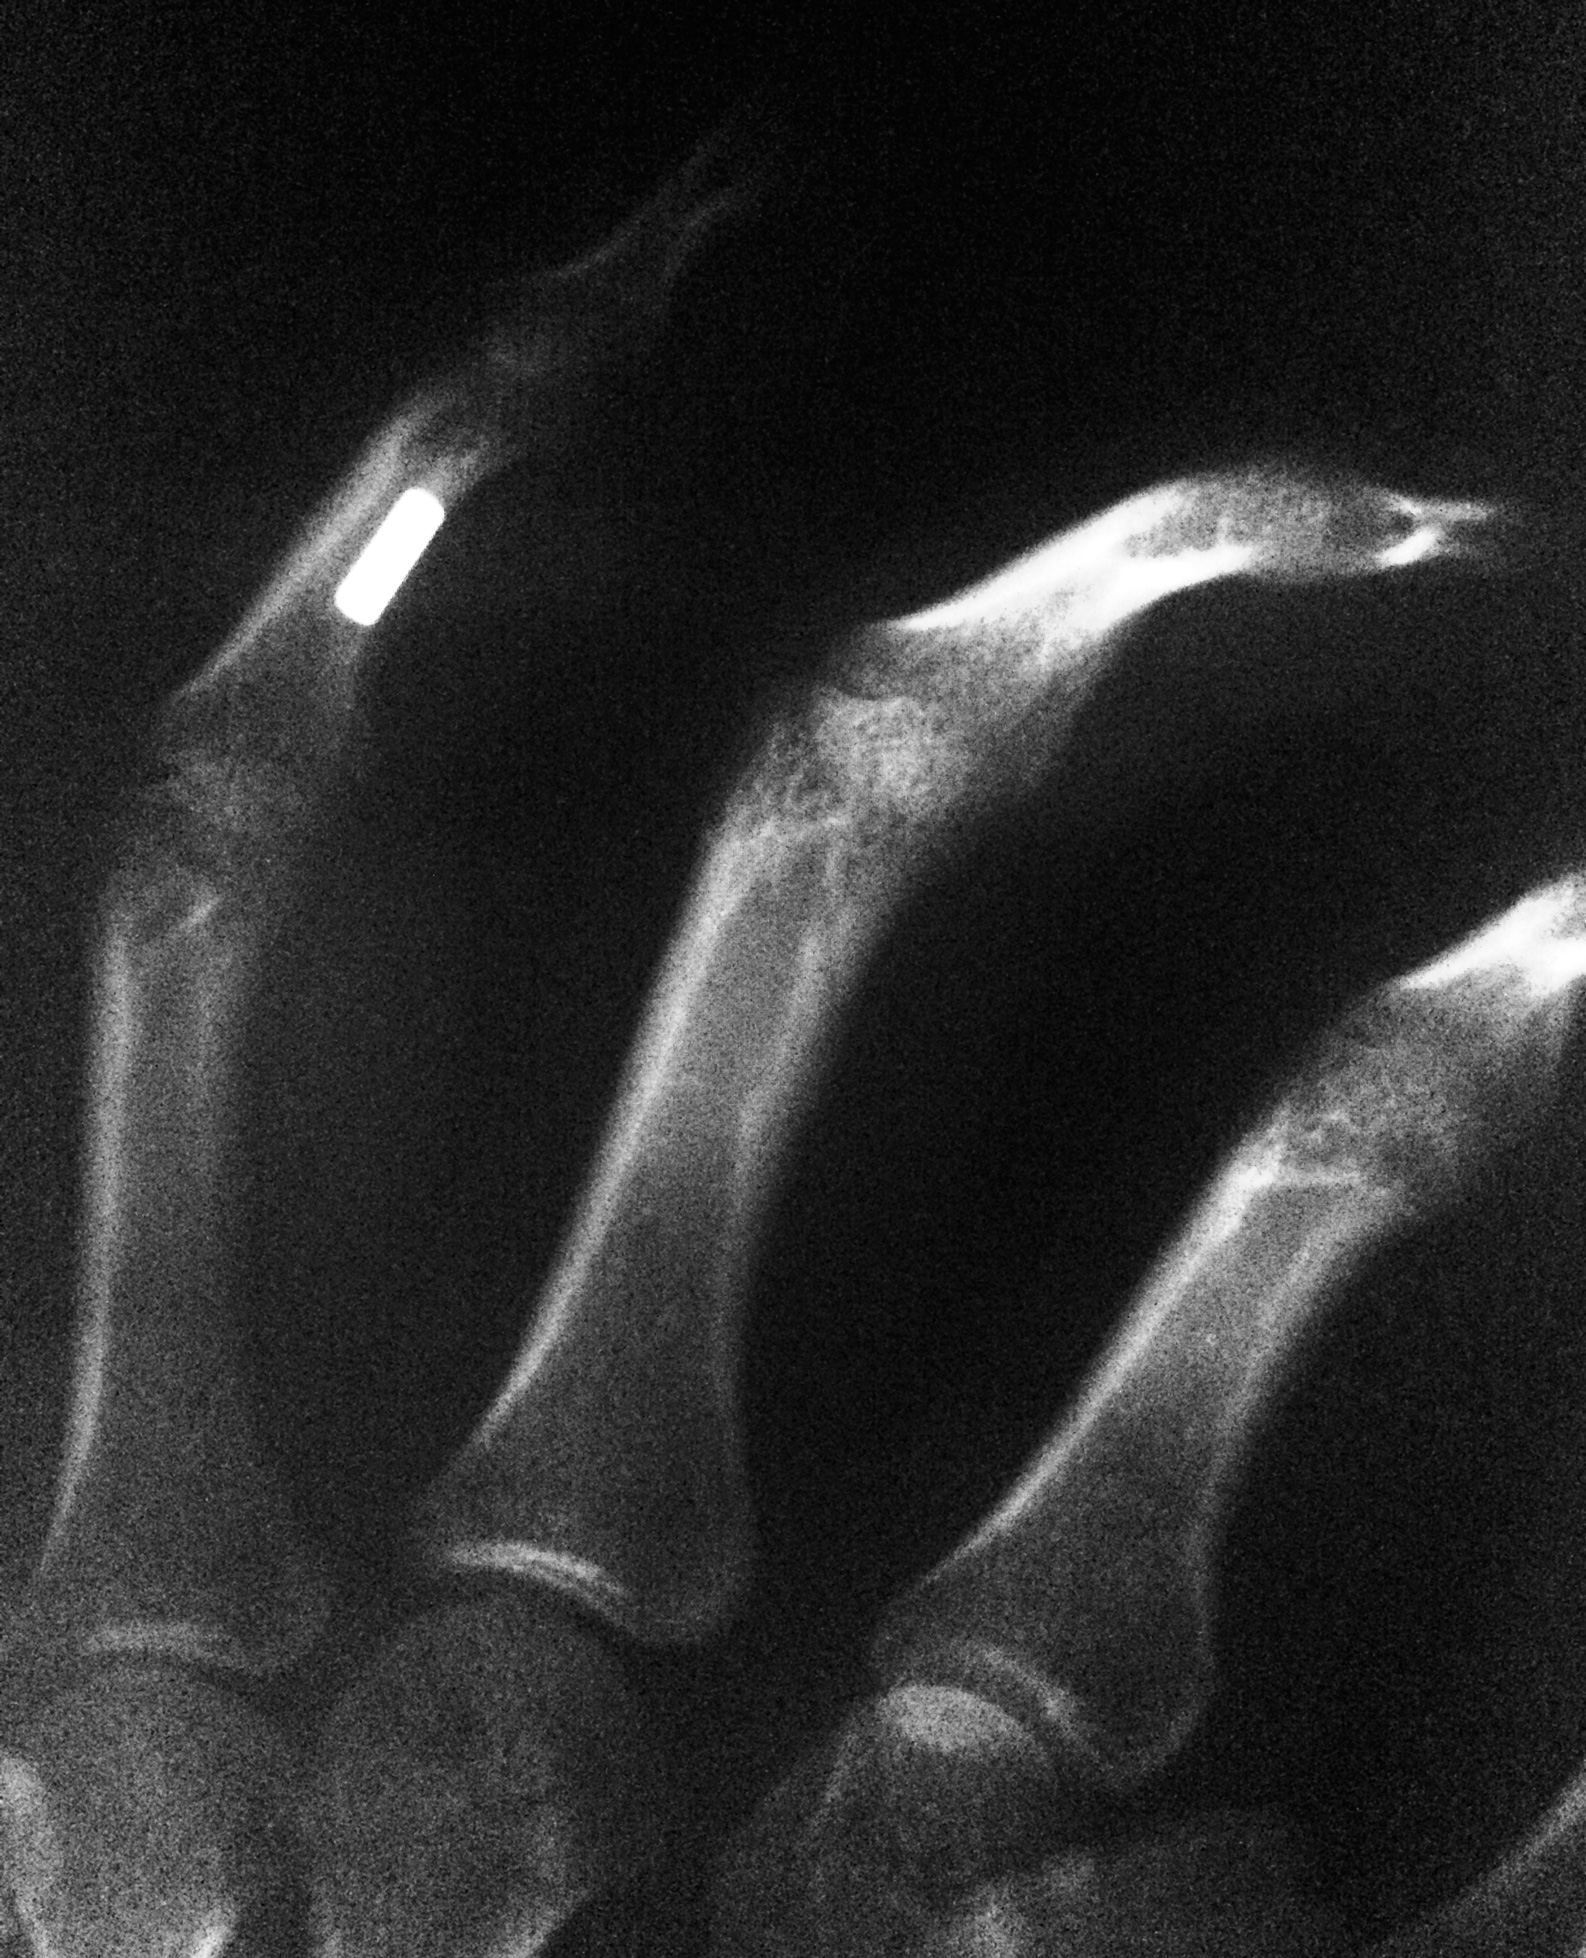 X-Ray of the magnet in my finger